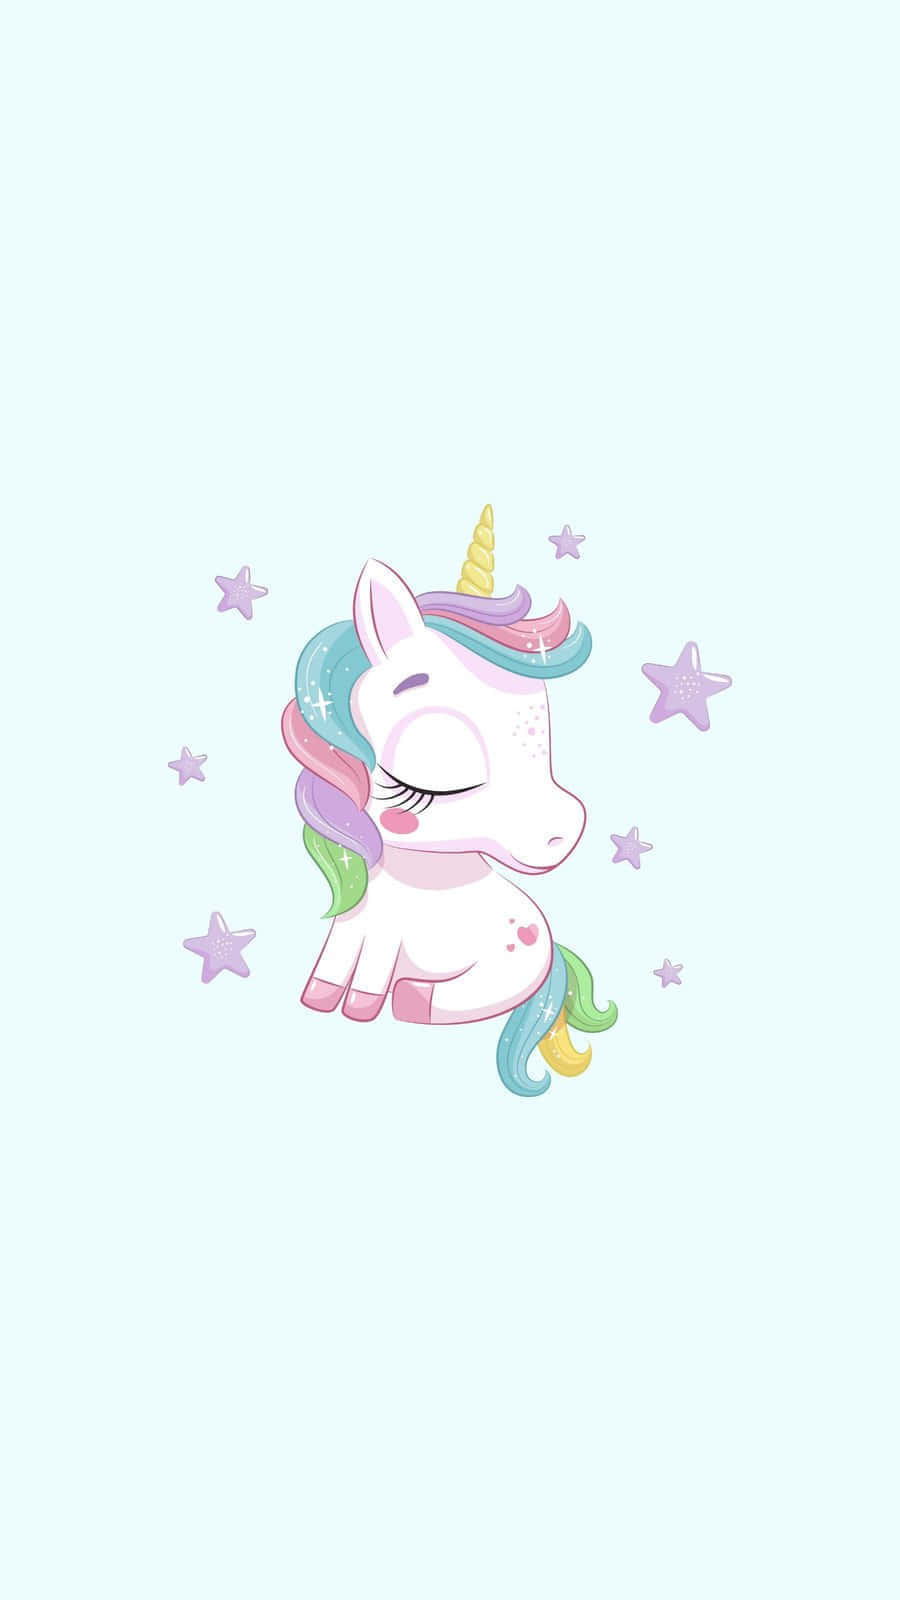 A Magical and Colorful Pastel Unicorn